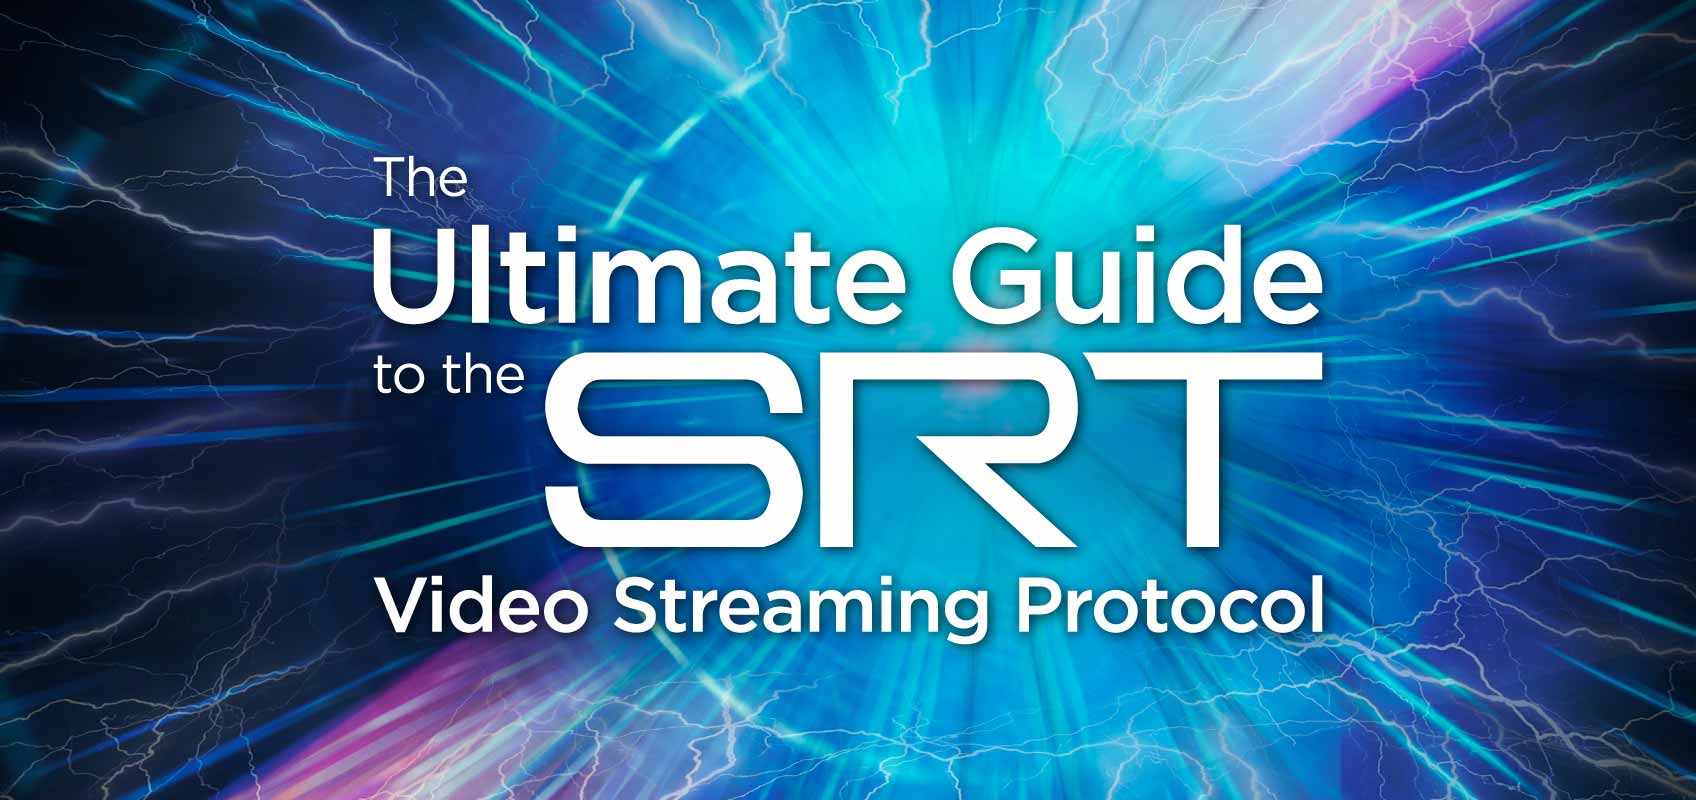 The Ultimate Guide to SRT Video Streaming Protocol